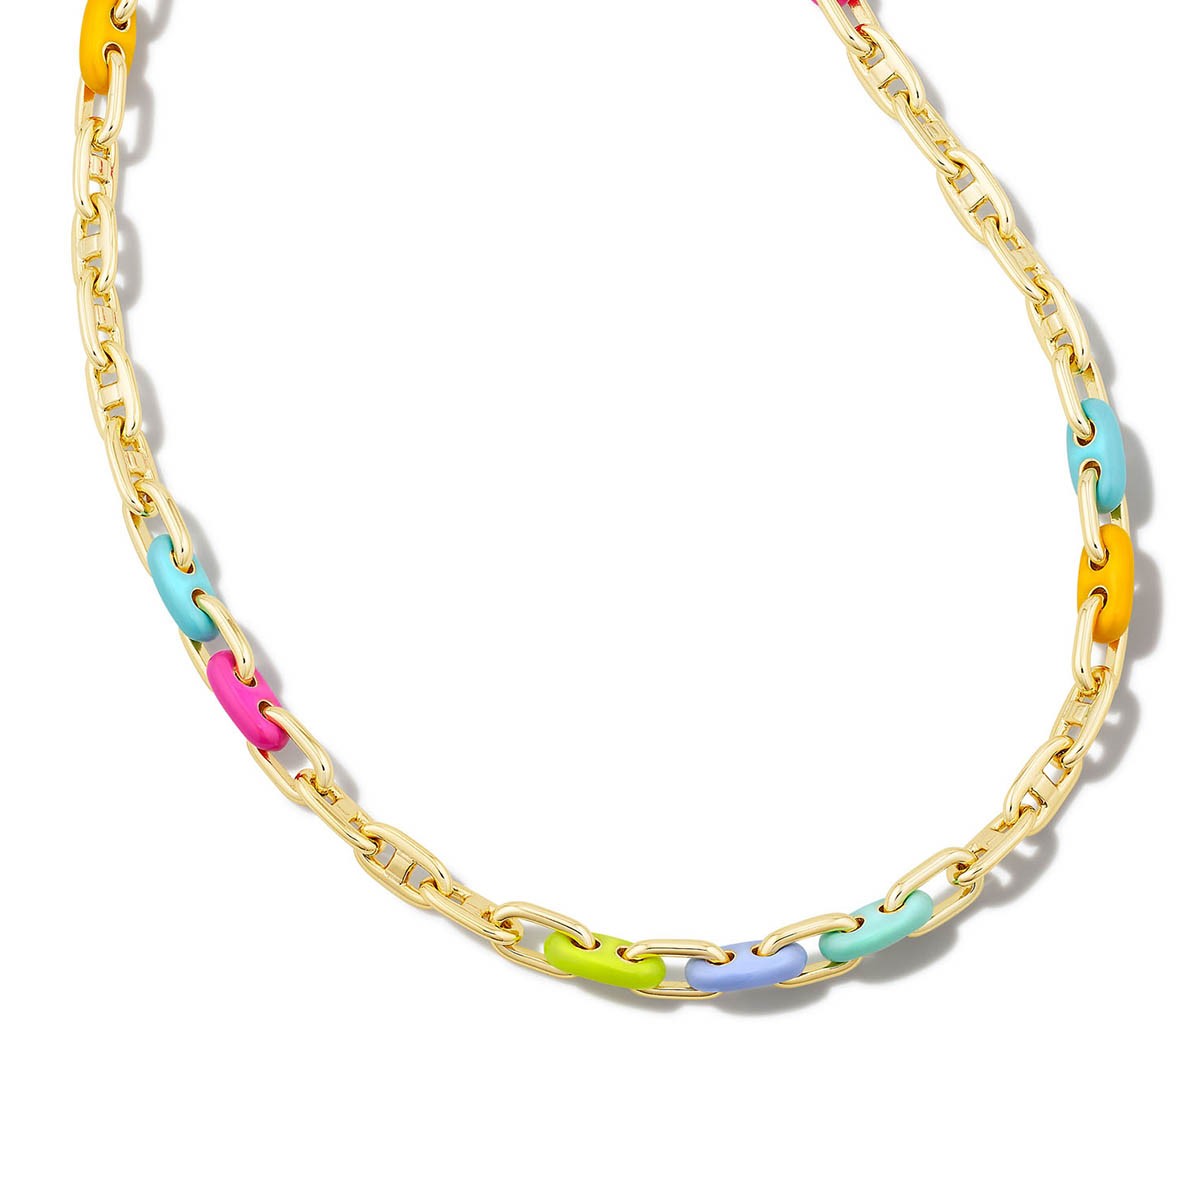 Kendra Scott Bailey Yellow Gold Plate Chain Necklace in Rainbow Multi Mix, 9608850955